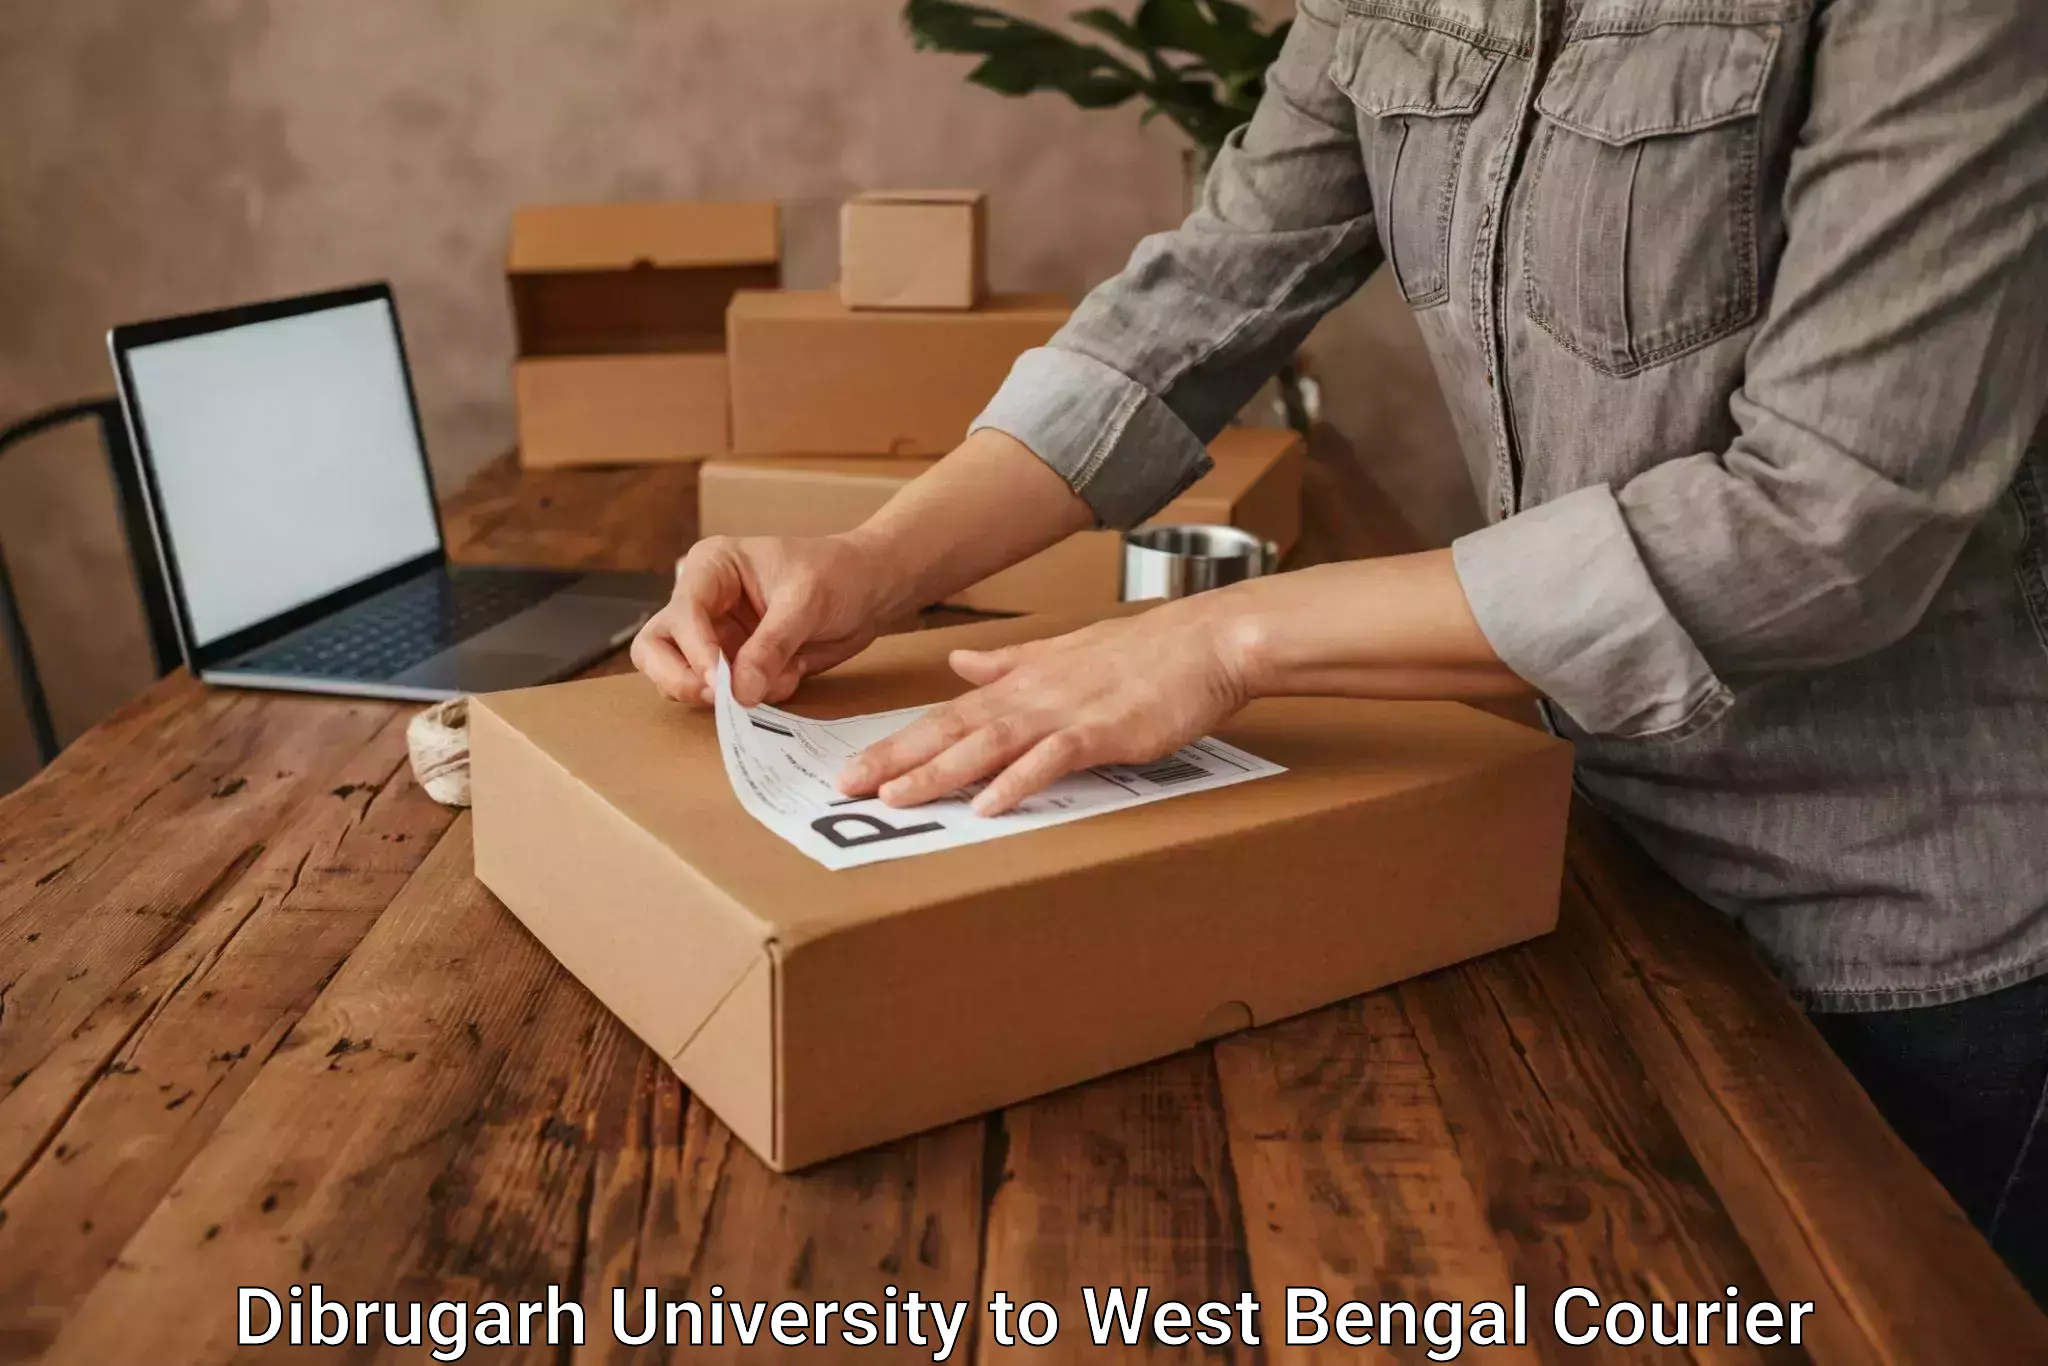 24-hour courier services in Dibrugarh University to Mirzapur Bardhaman